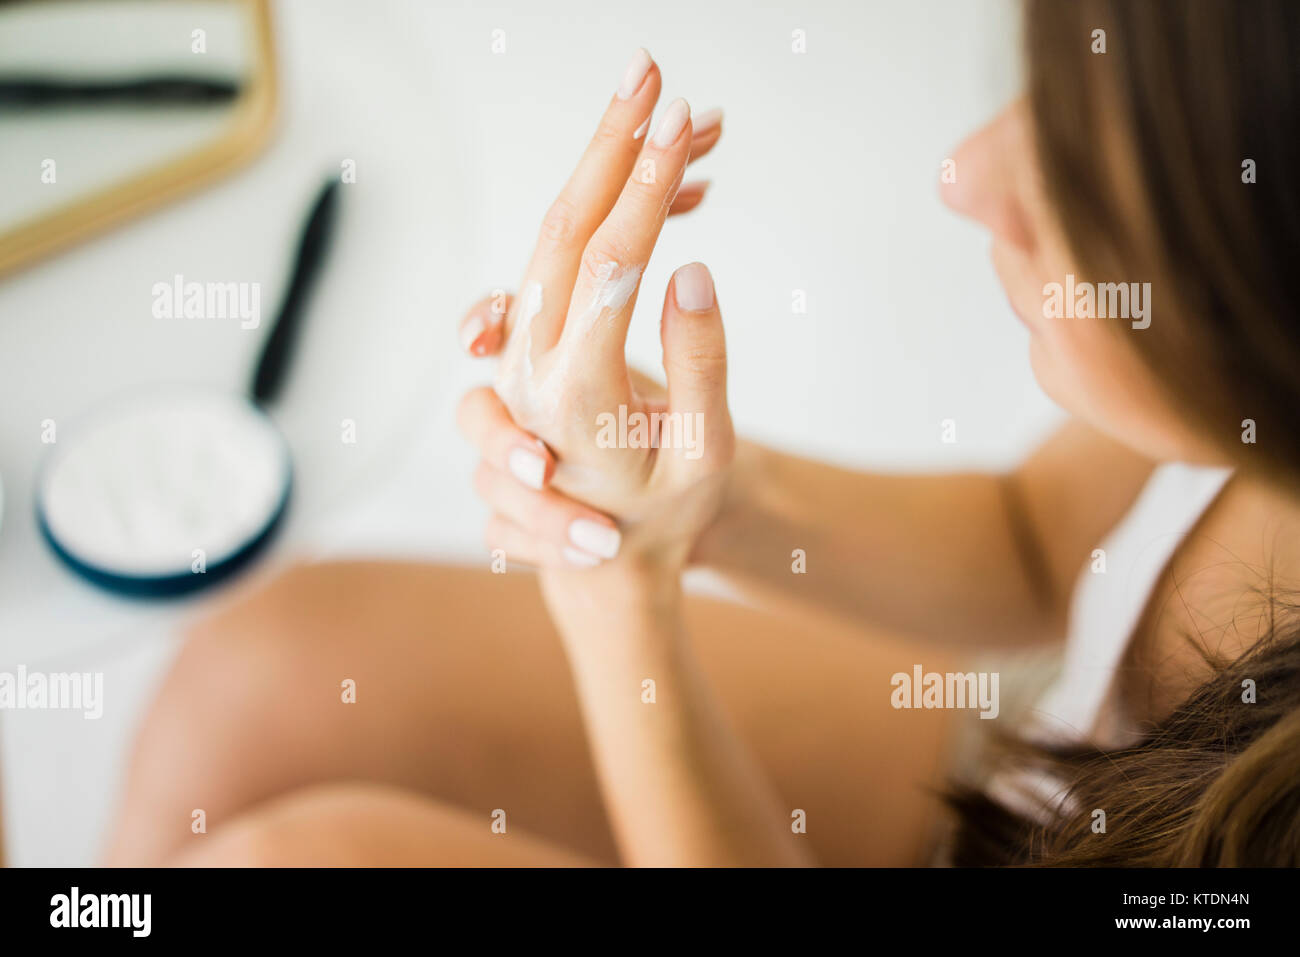 Woman creaming her hands, partial view Stock Photo